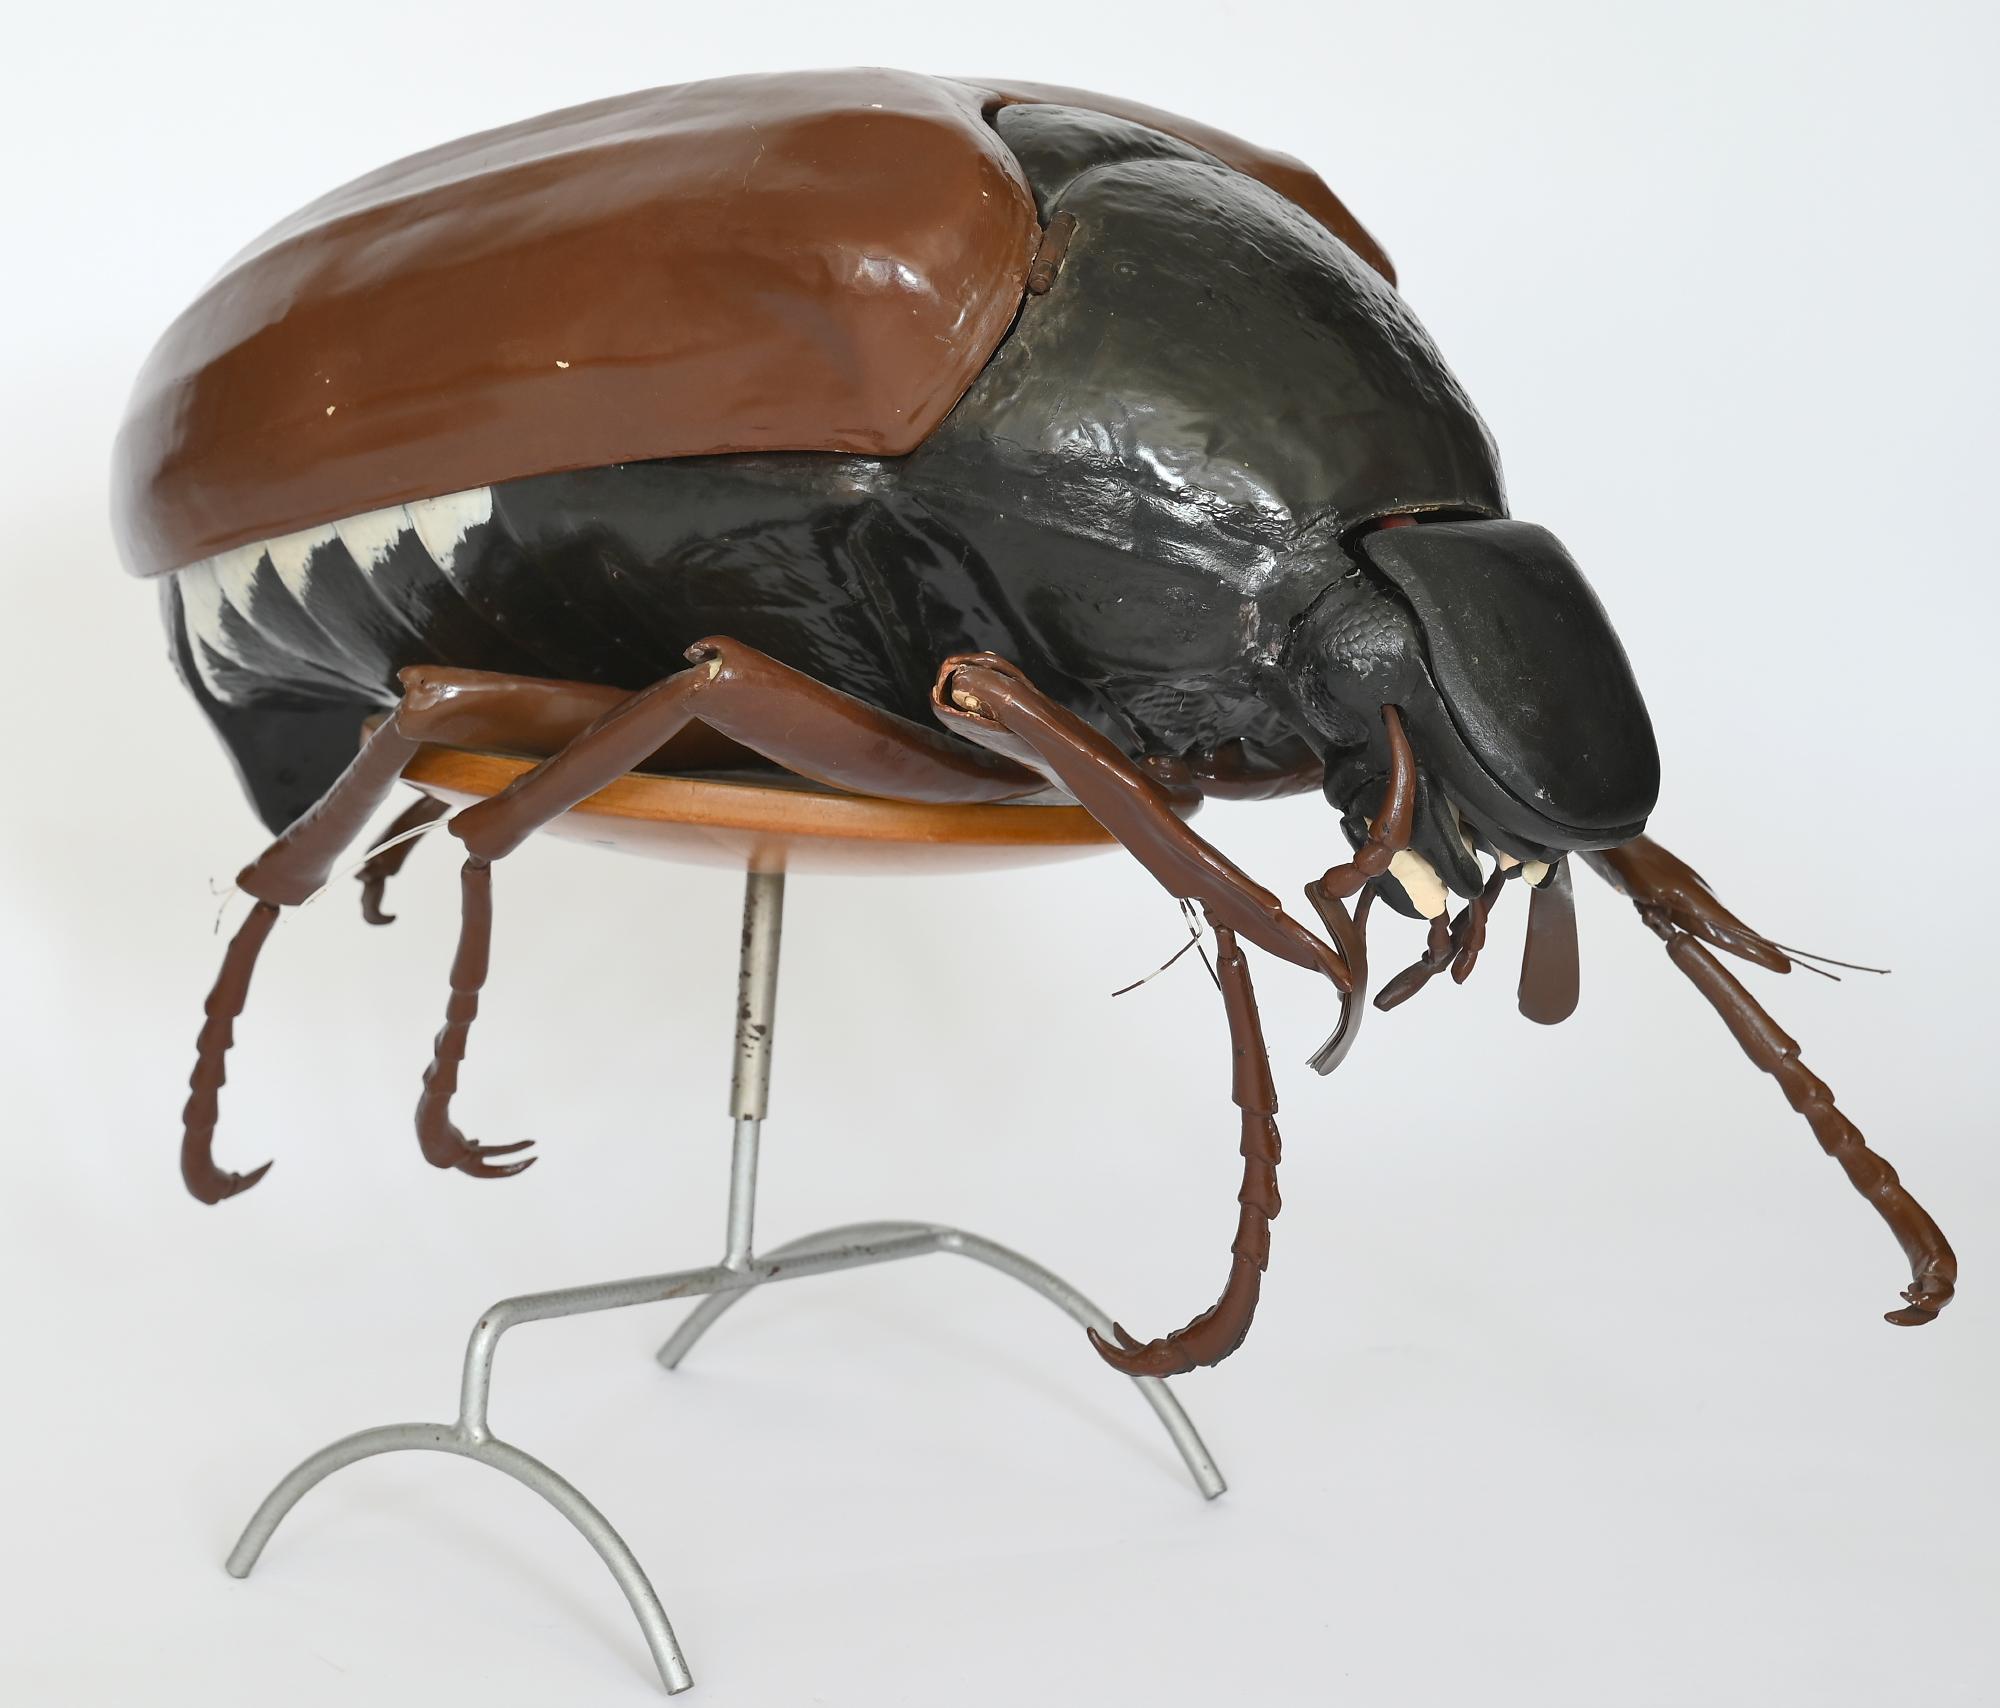 Large anatomical model of a cockchafer (Melolontha) made out of wood, plastic, paper mache
Two-part outer cover with small hooks, insertable and painted wings, movable legs
The removable outer cover and the head part conceal a plastic and colored